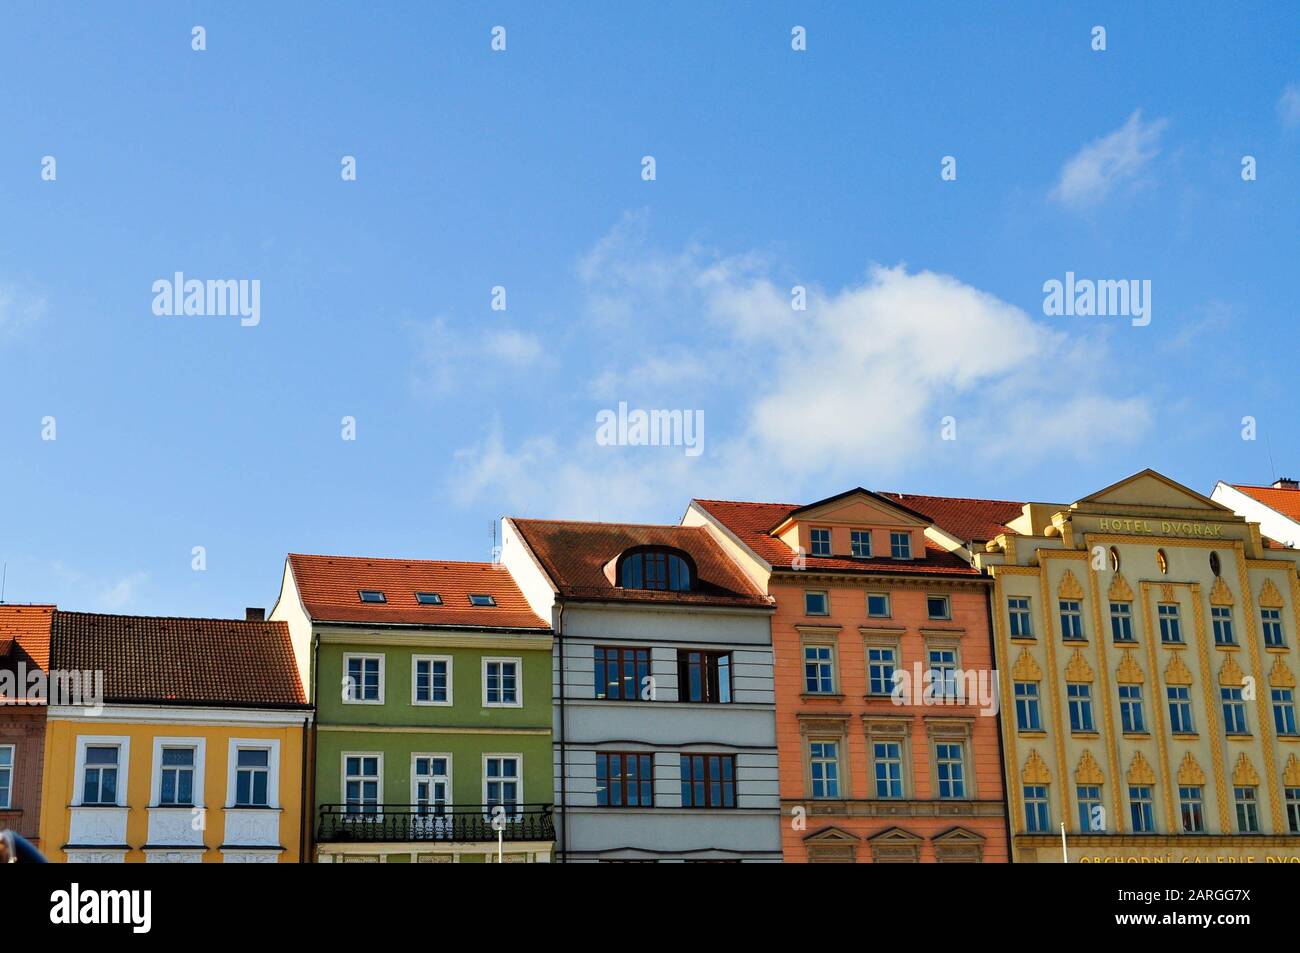 Typical colorful houses buildings with multicolored facade and windows, blue sky background in budweis czech republic Stock Photo